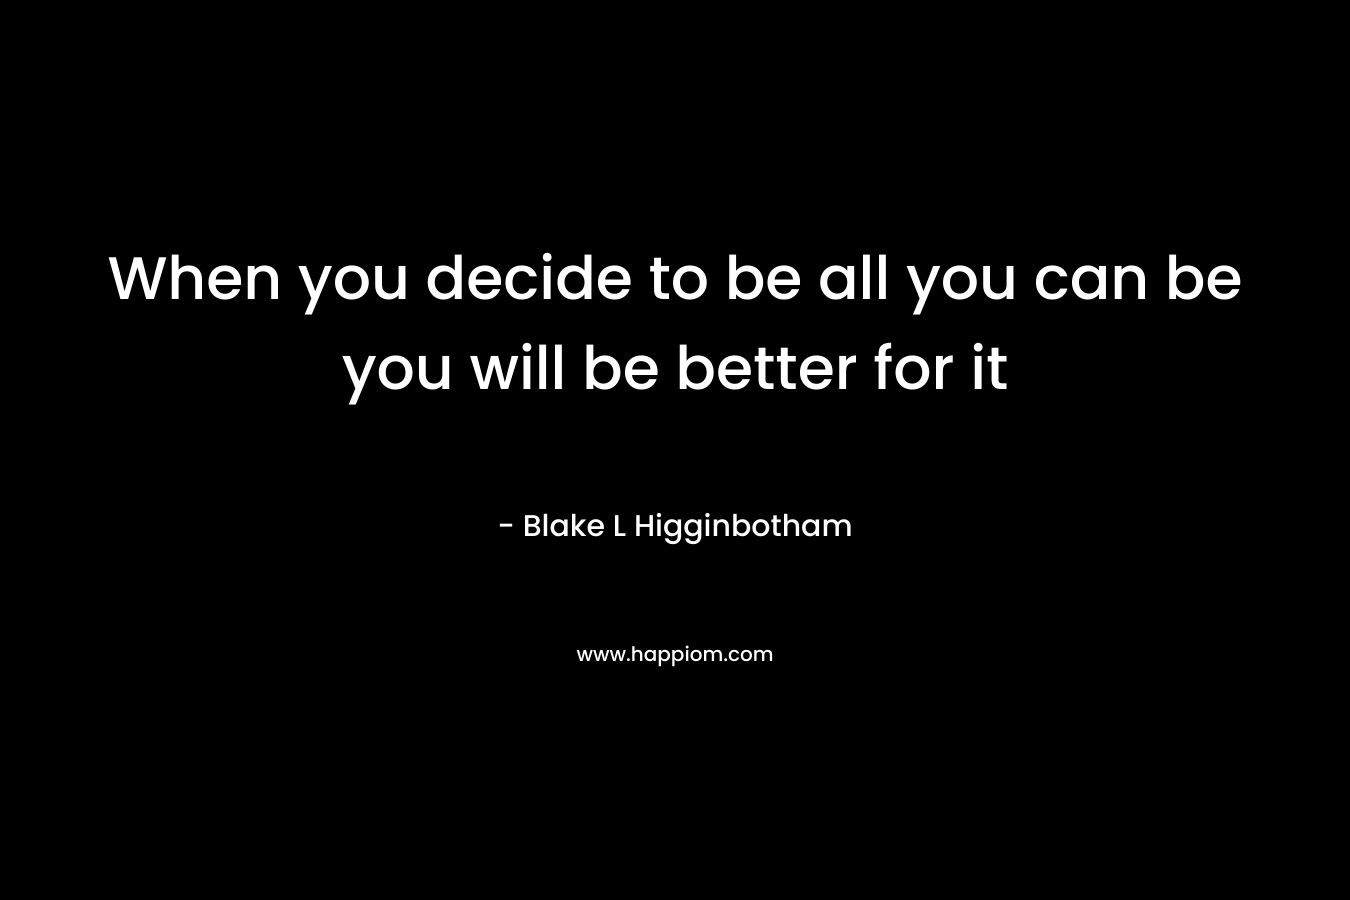 When you decide to be all you can be you will be better for it – Blake L Higginbotham